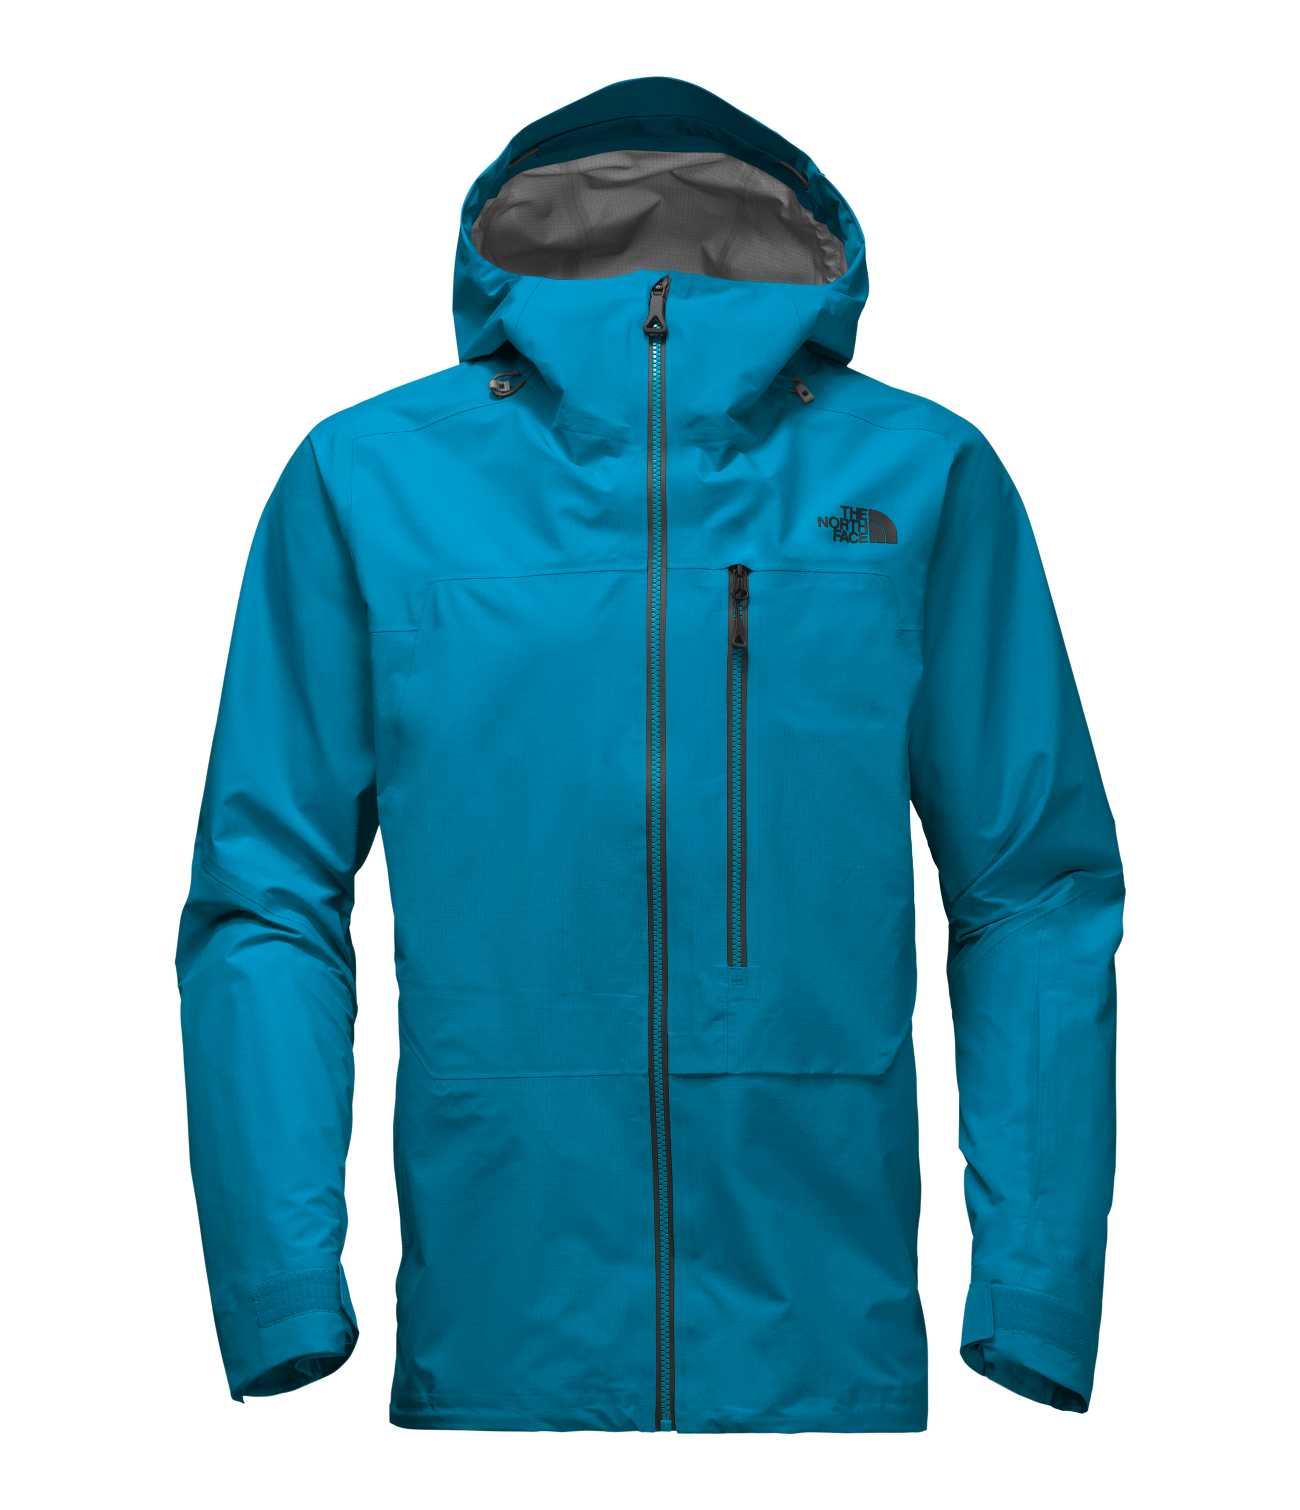 MEN'S FREE THINKER JACKET | The North Face | The North Face Renewed